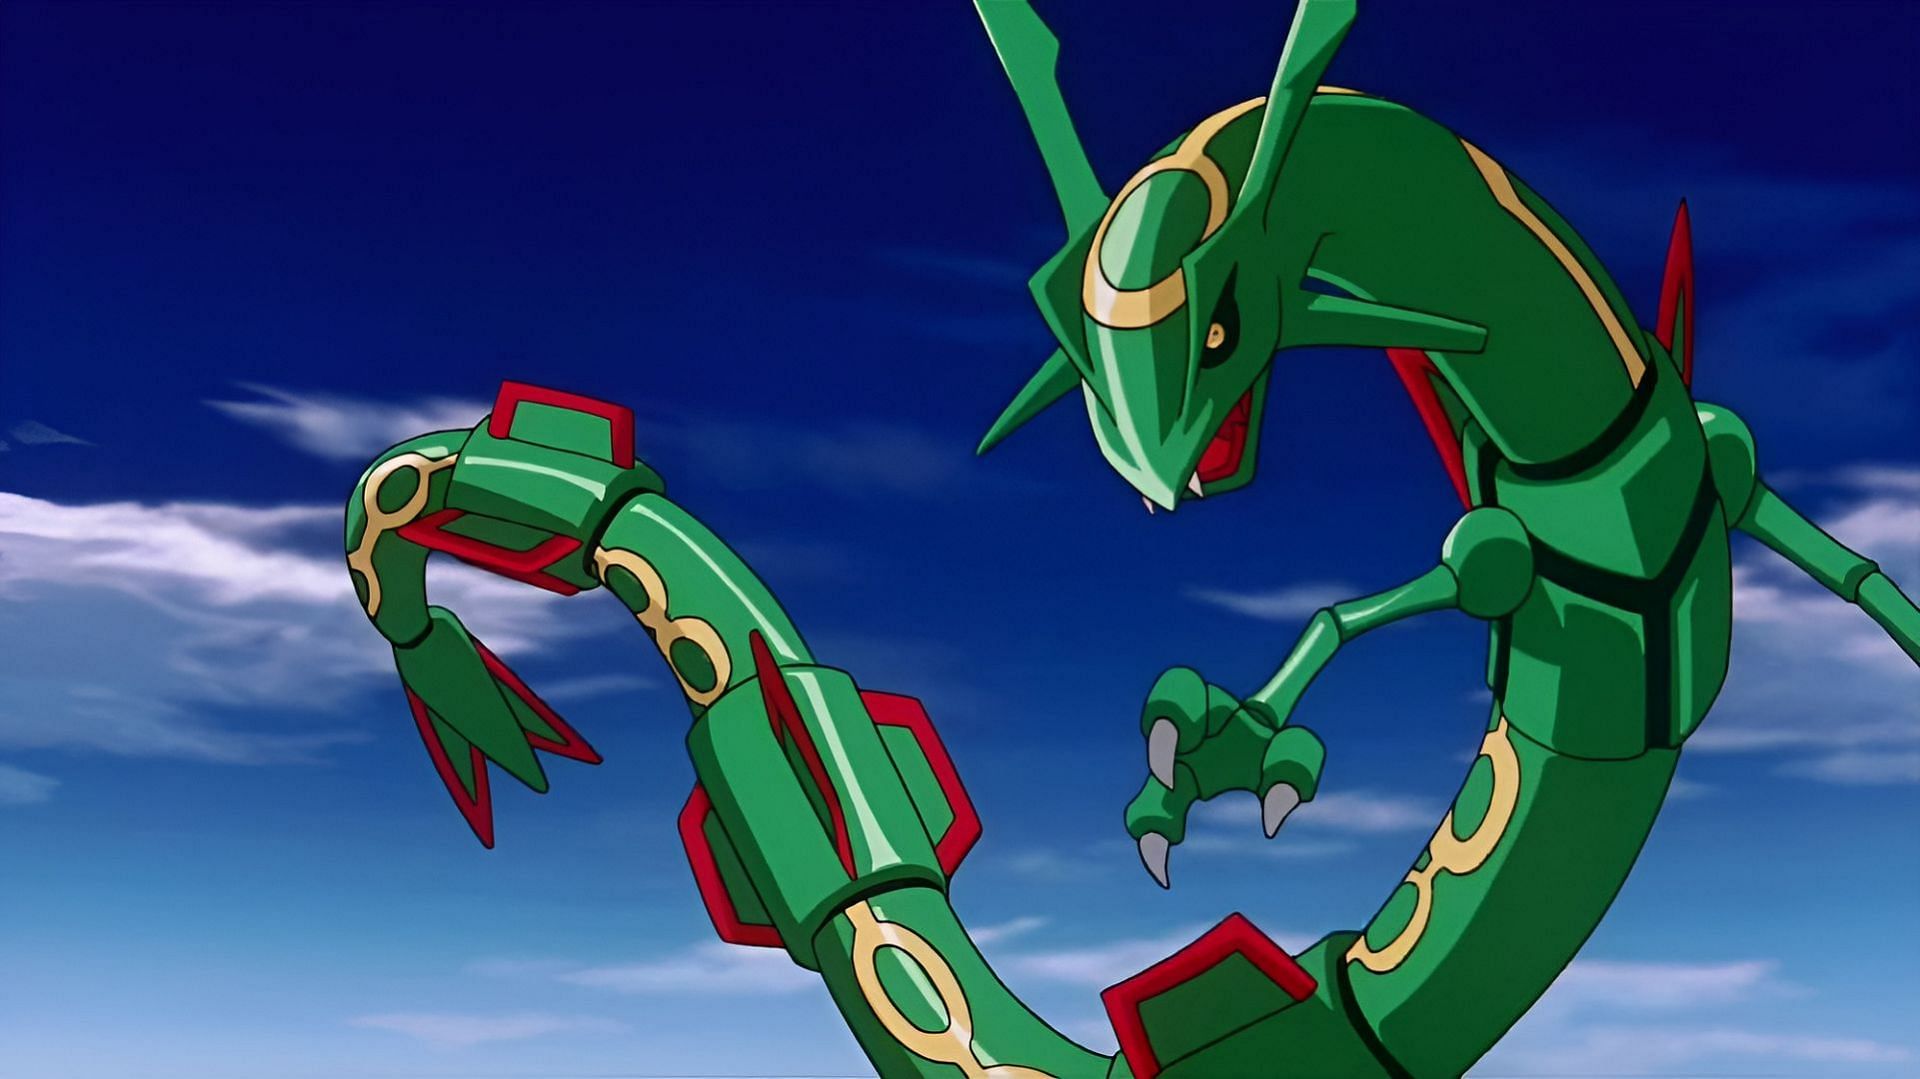 A futuristic Rayquaza could be immensely popular with fans (Image via The Pokemon Company)